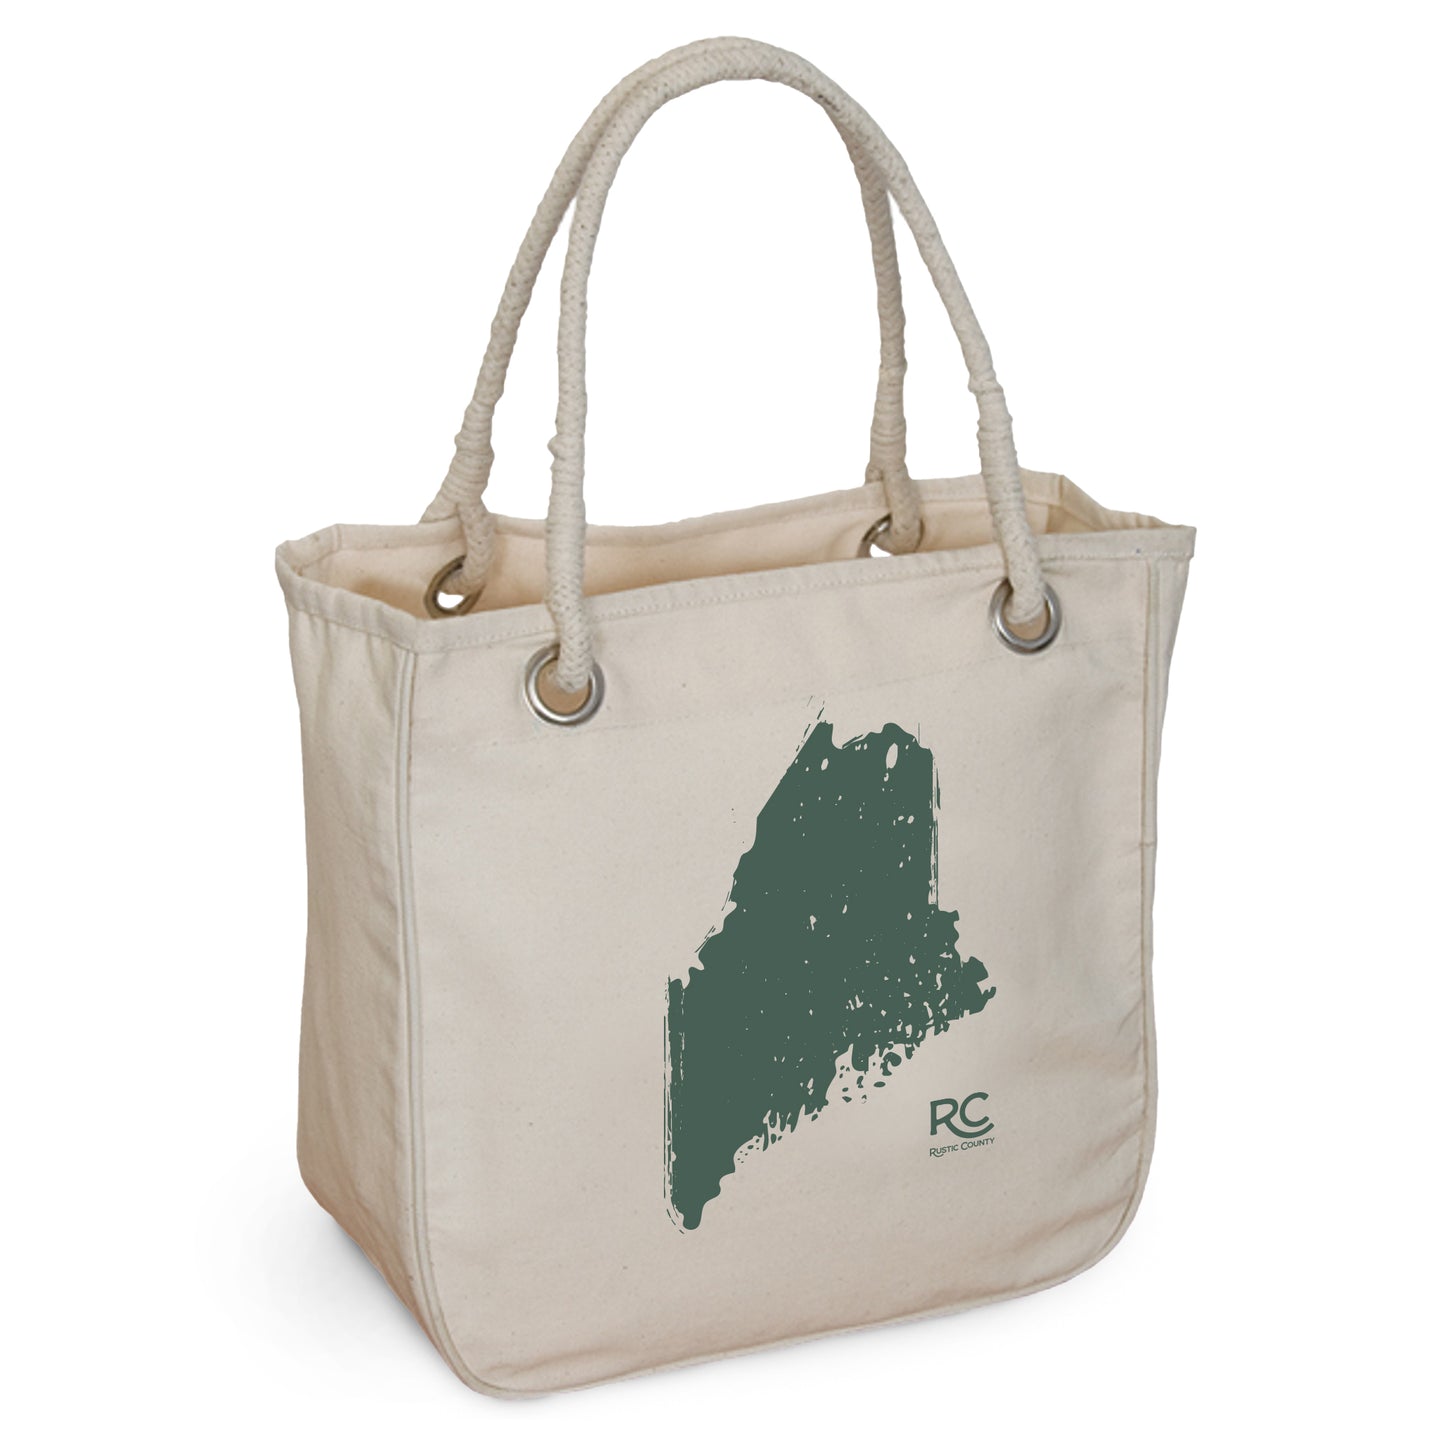 A beige organic cotton Maine Rope Tote from Rustic County with sturdy rope handles and a green brushstroke map of Maine imprinted on one side, along with the initials "RC" in a lower corner.